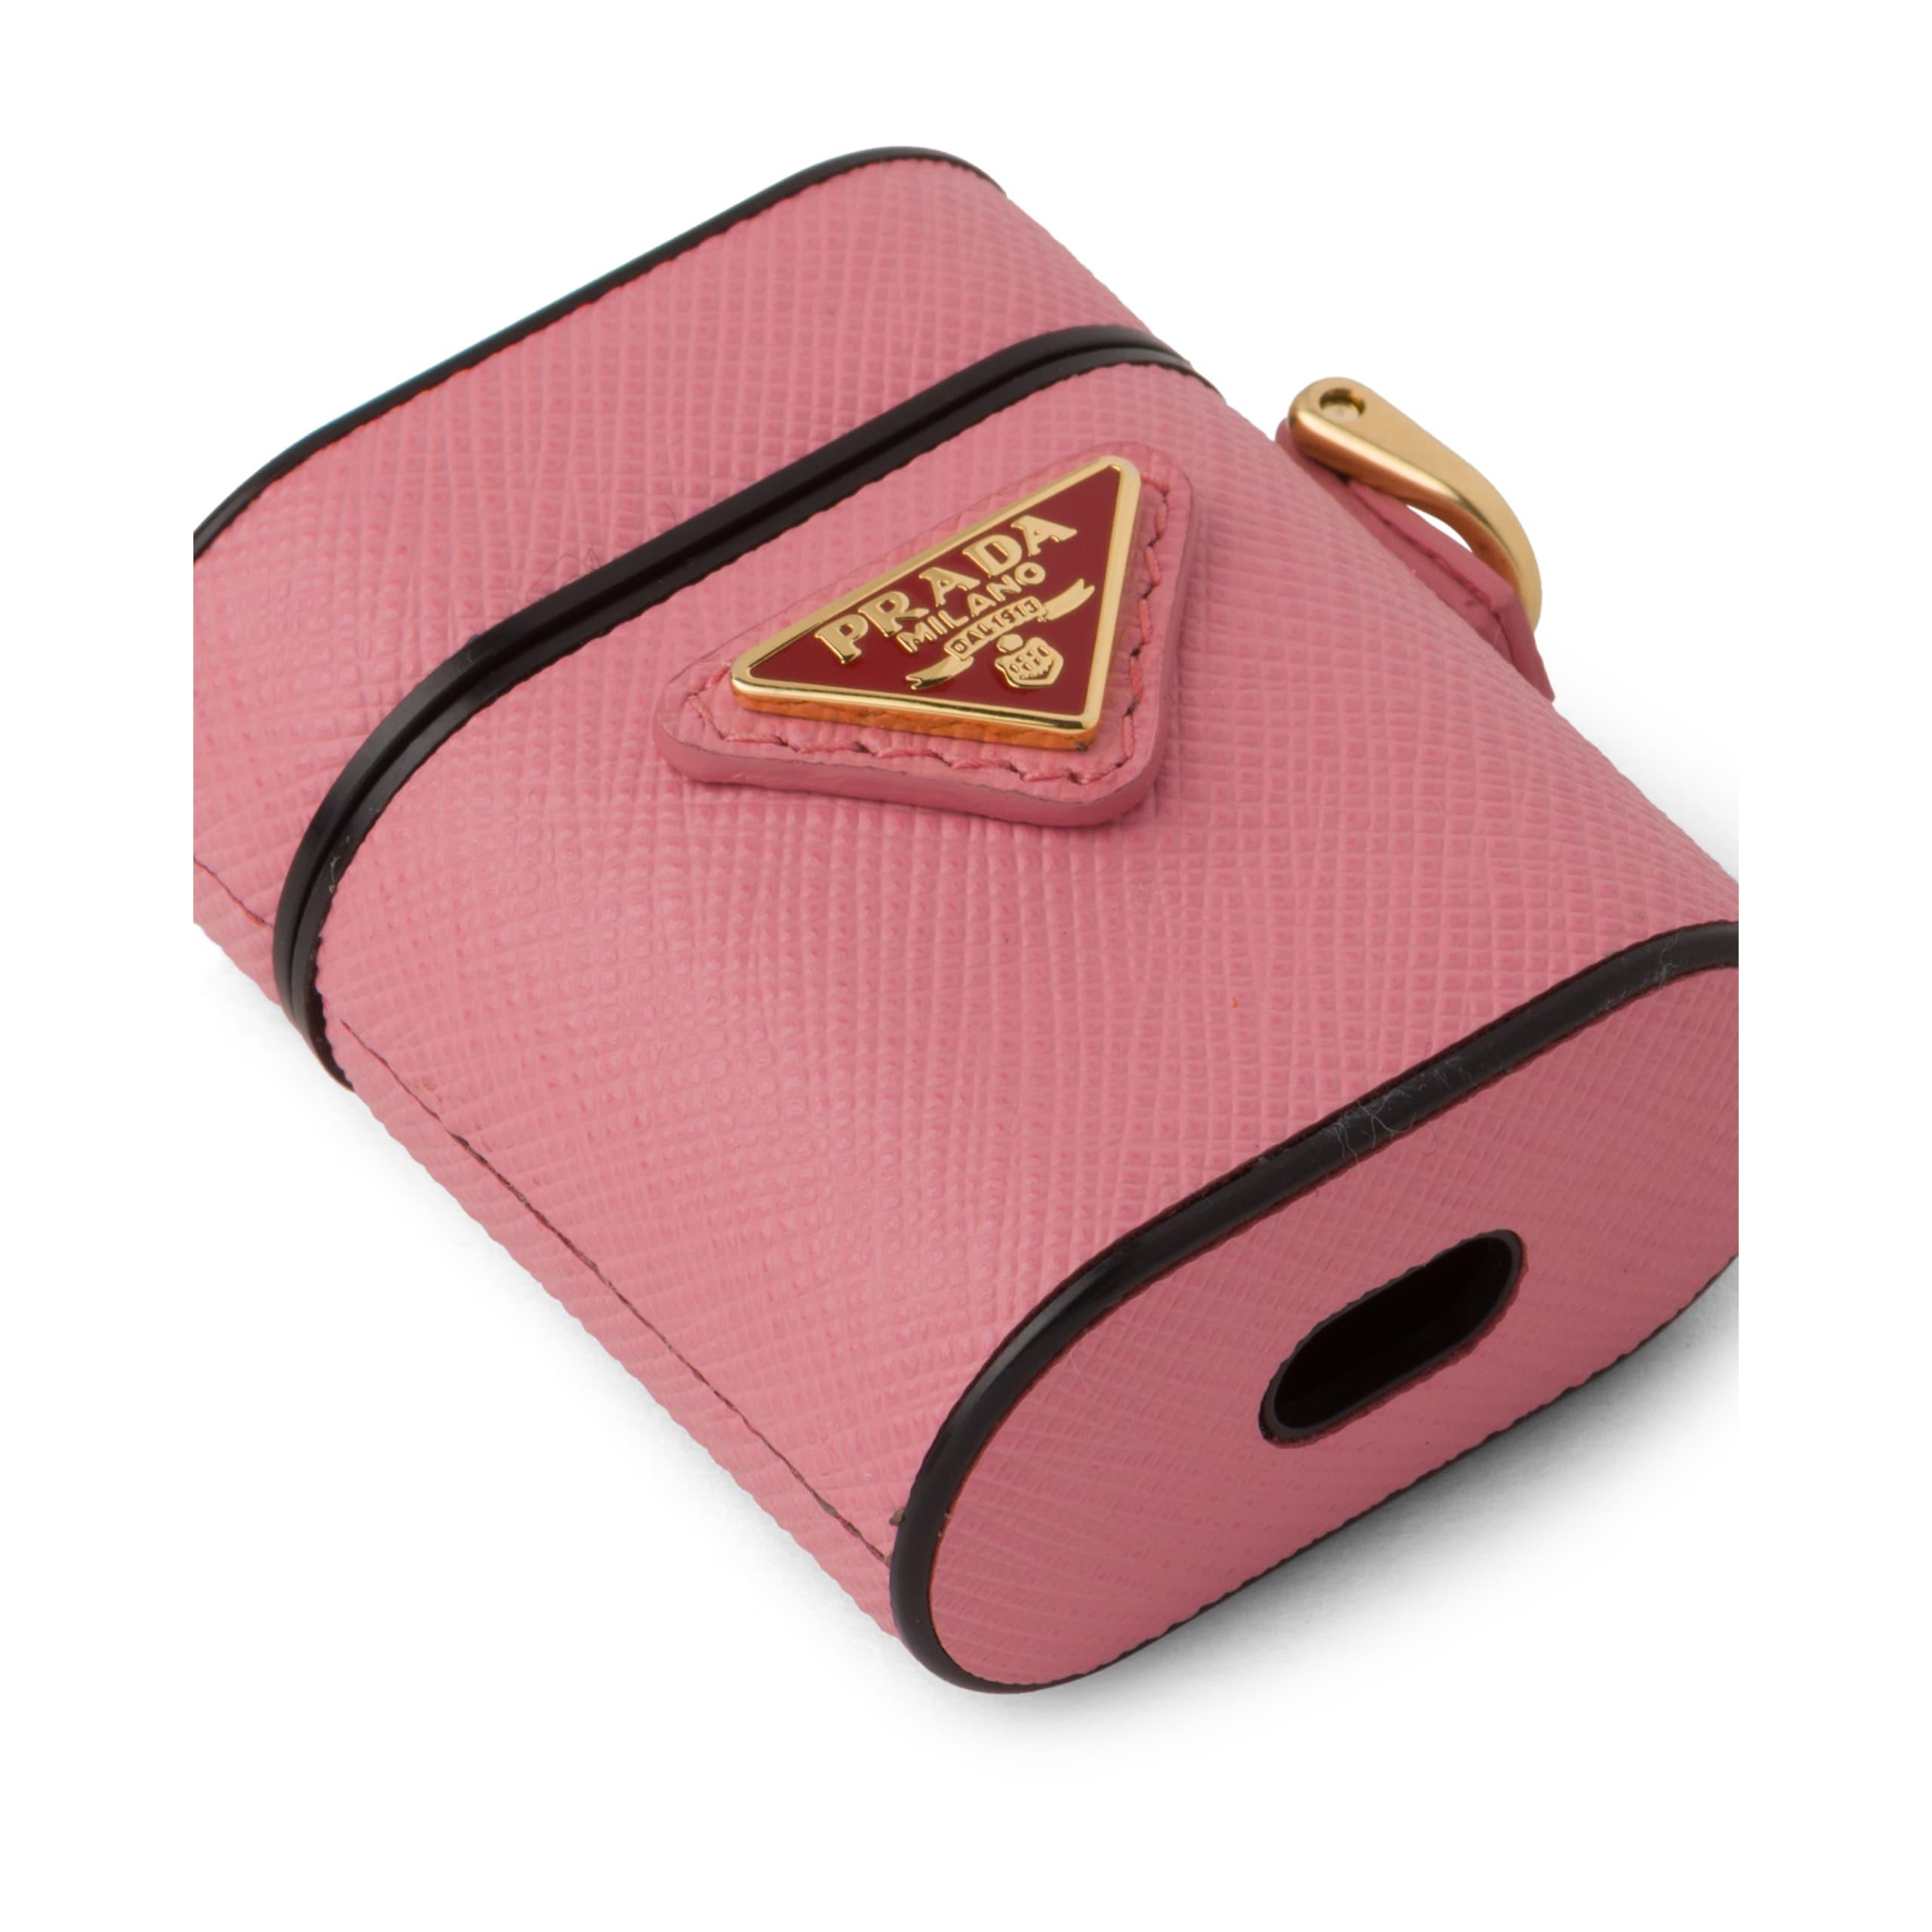 Prada Saffiano Leather Airpods Case in Pink | Lyst